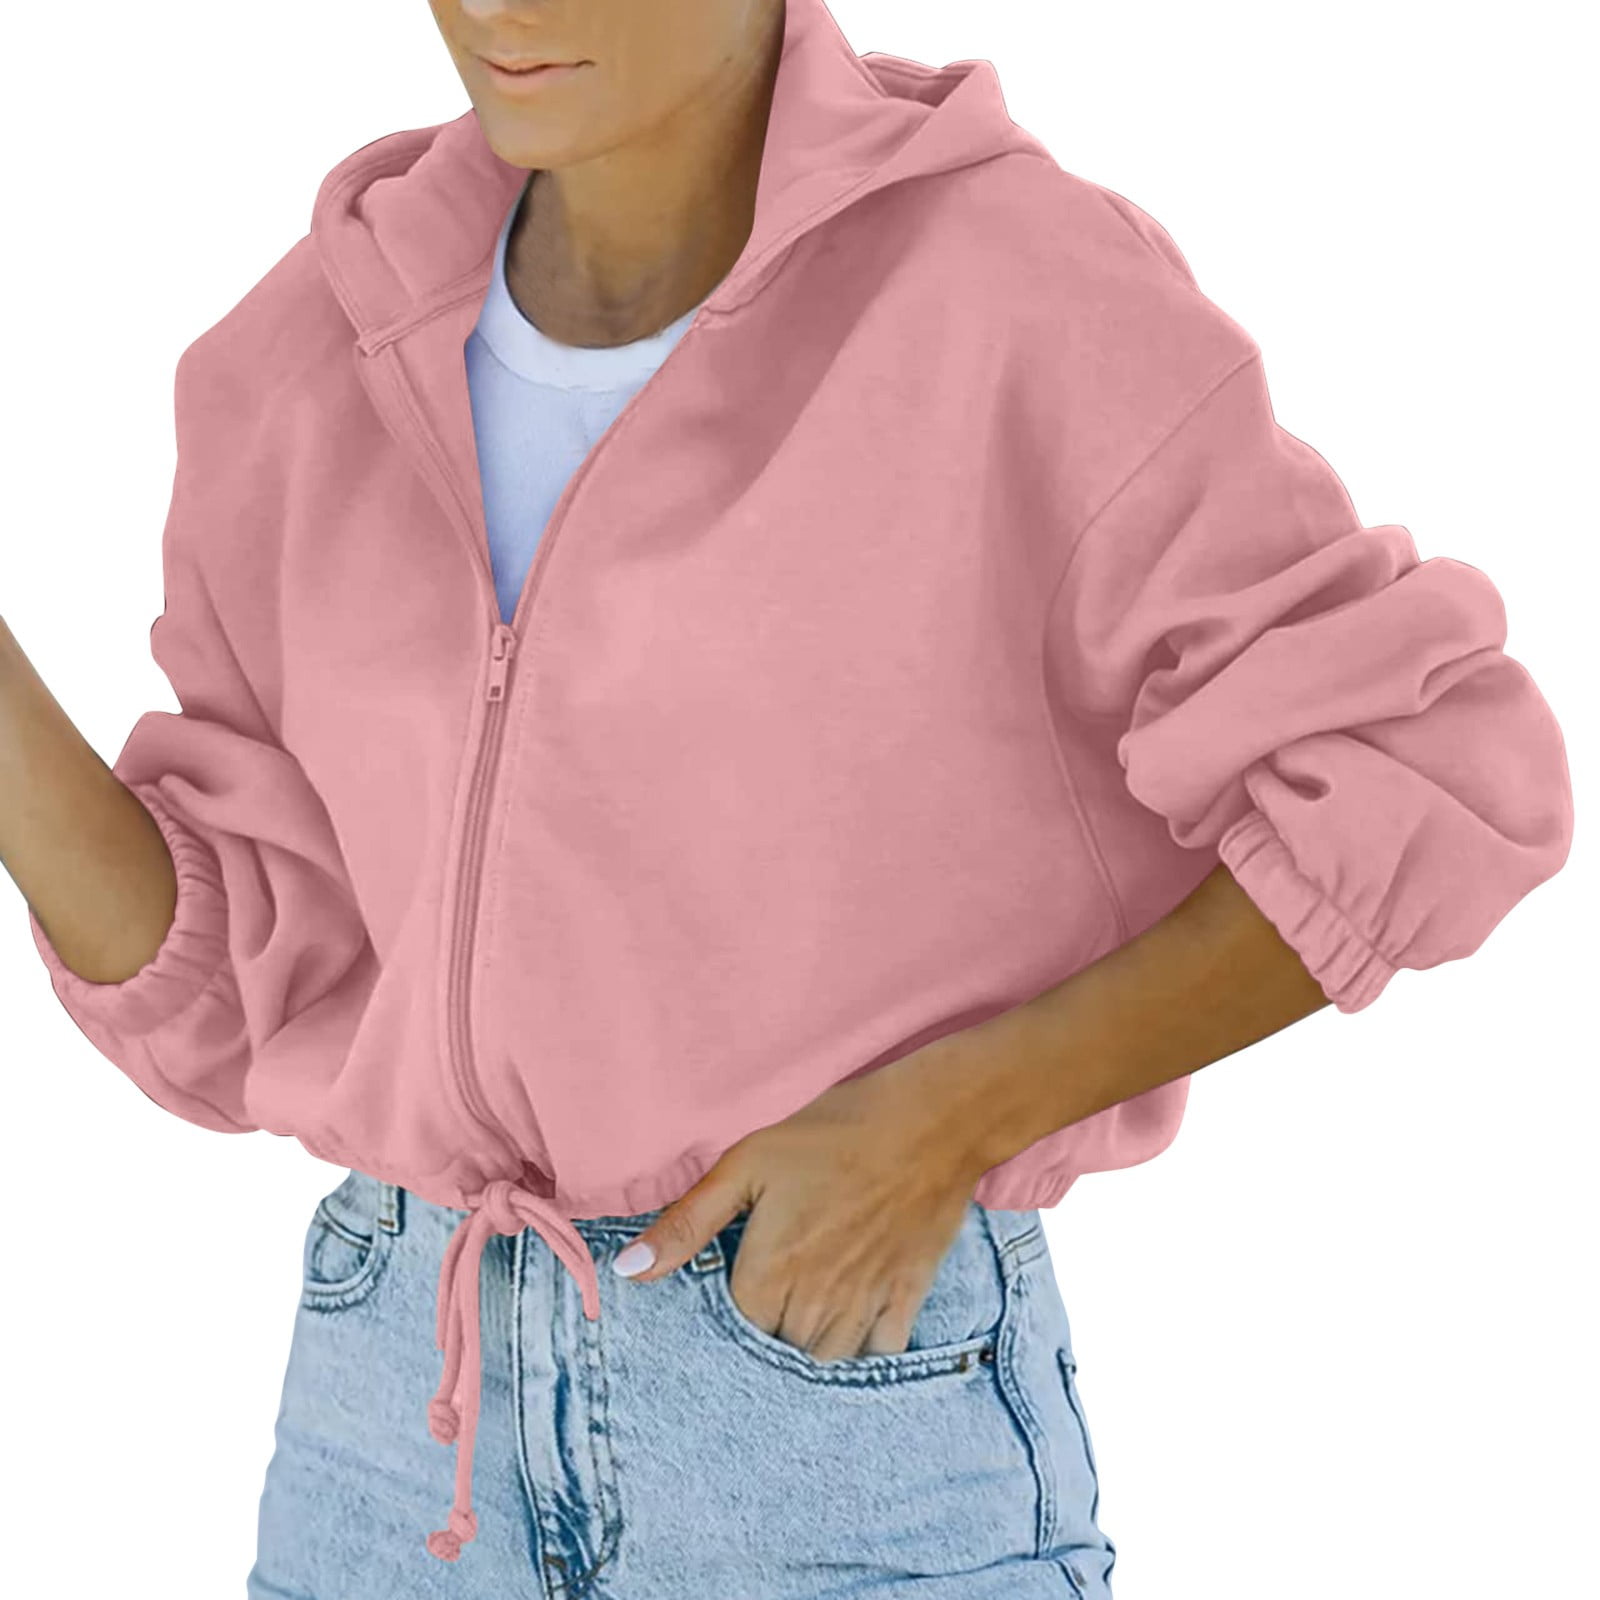 Daznico Jackets for Women Womens Long Sleeve Zip Up Hooded Pullover Casual  Workout Pullover Hoodie Pink XL